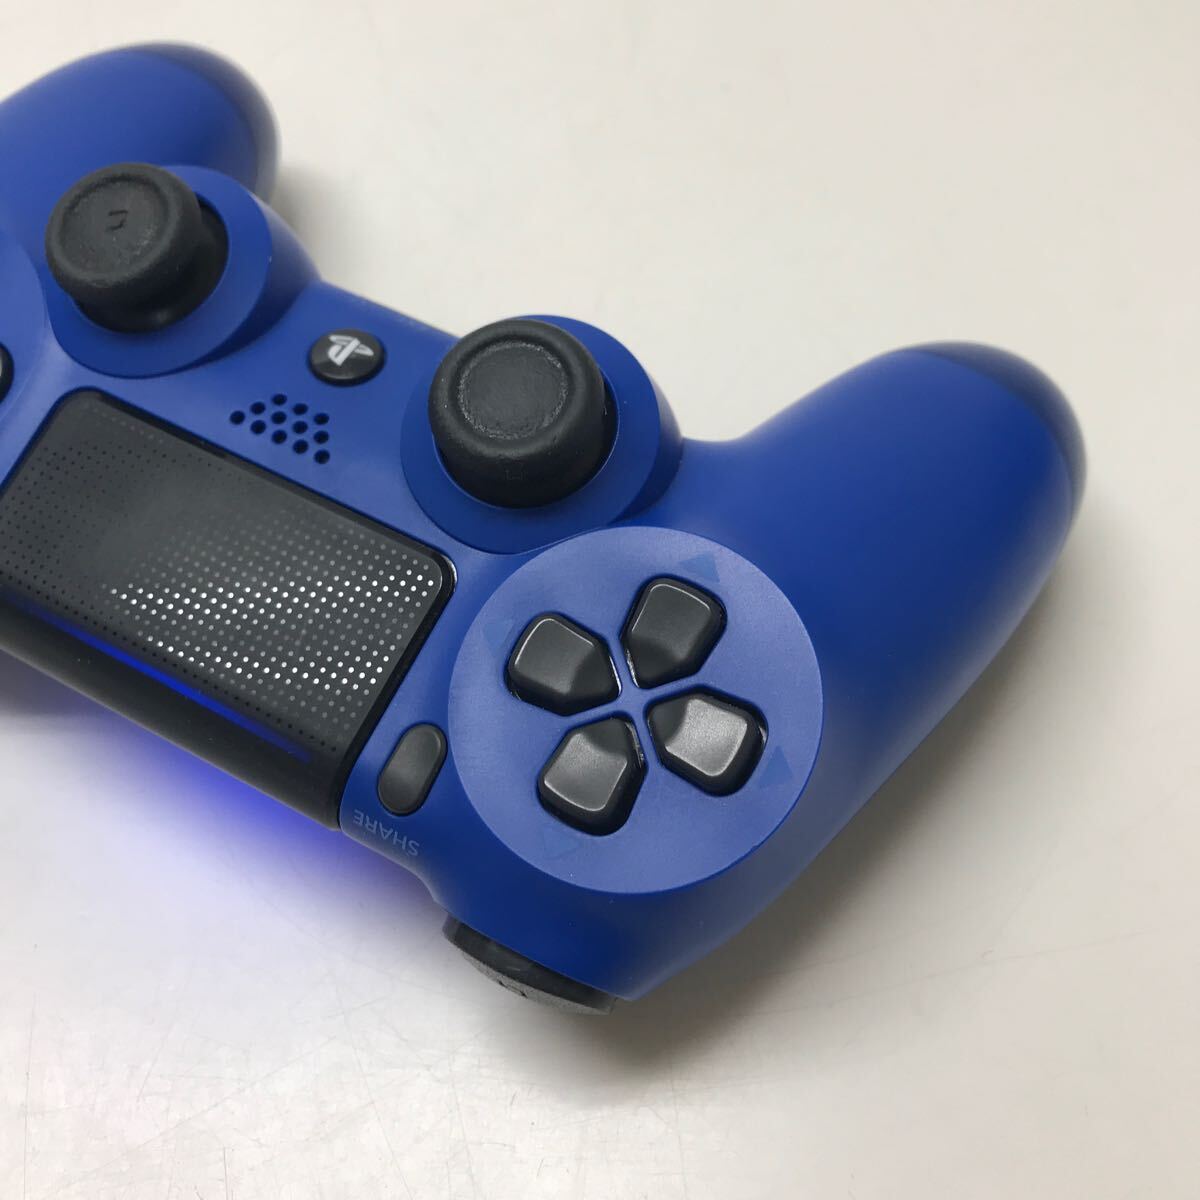 A289★SONY Ps4ワイヤレスコントローラー DUALSHOCK CUH-ZCT2J WAVE BLUE【動作品】_画像6